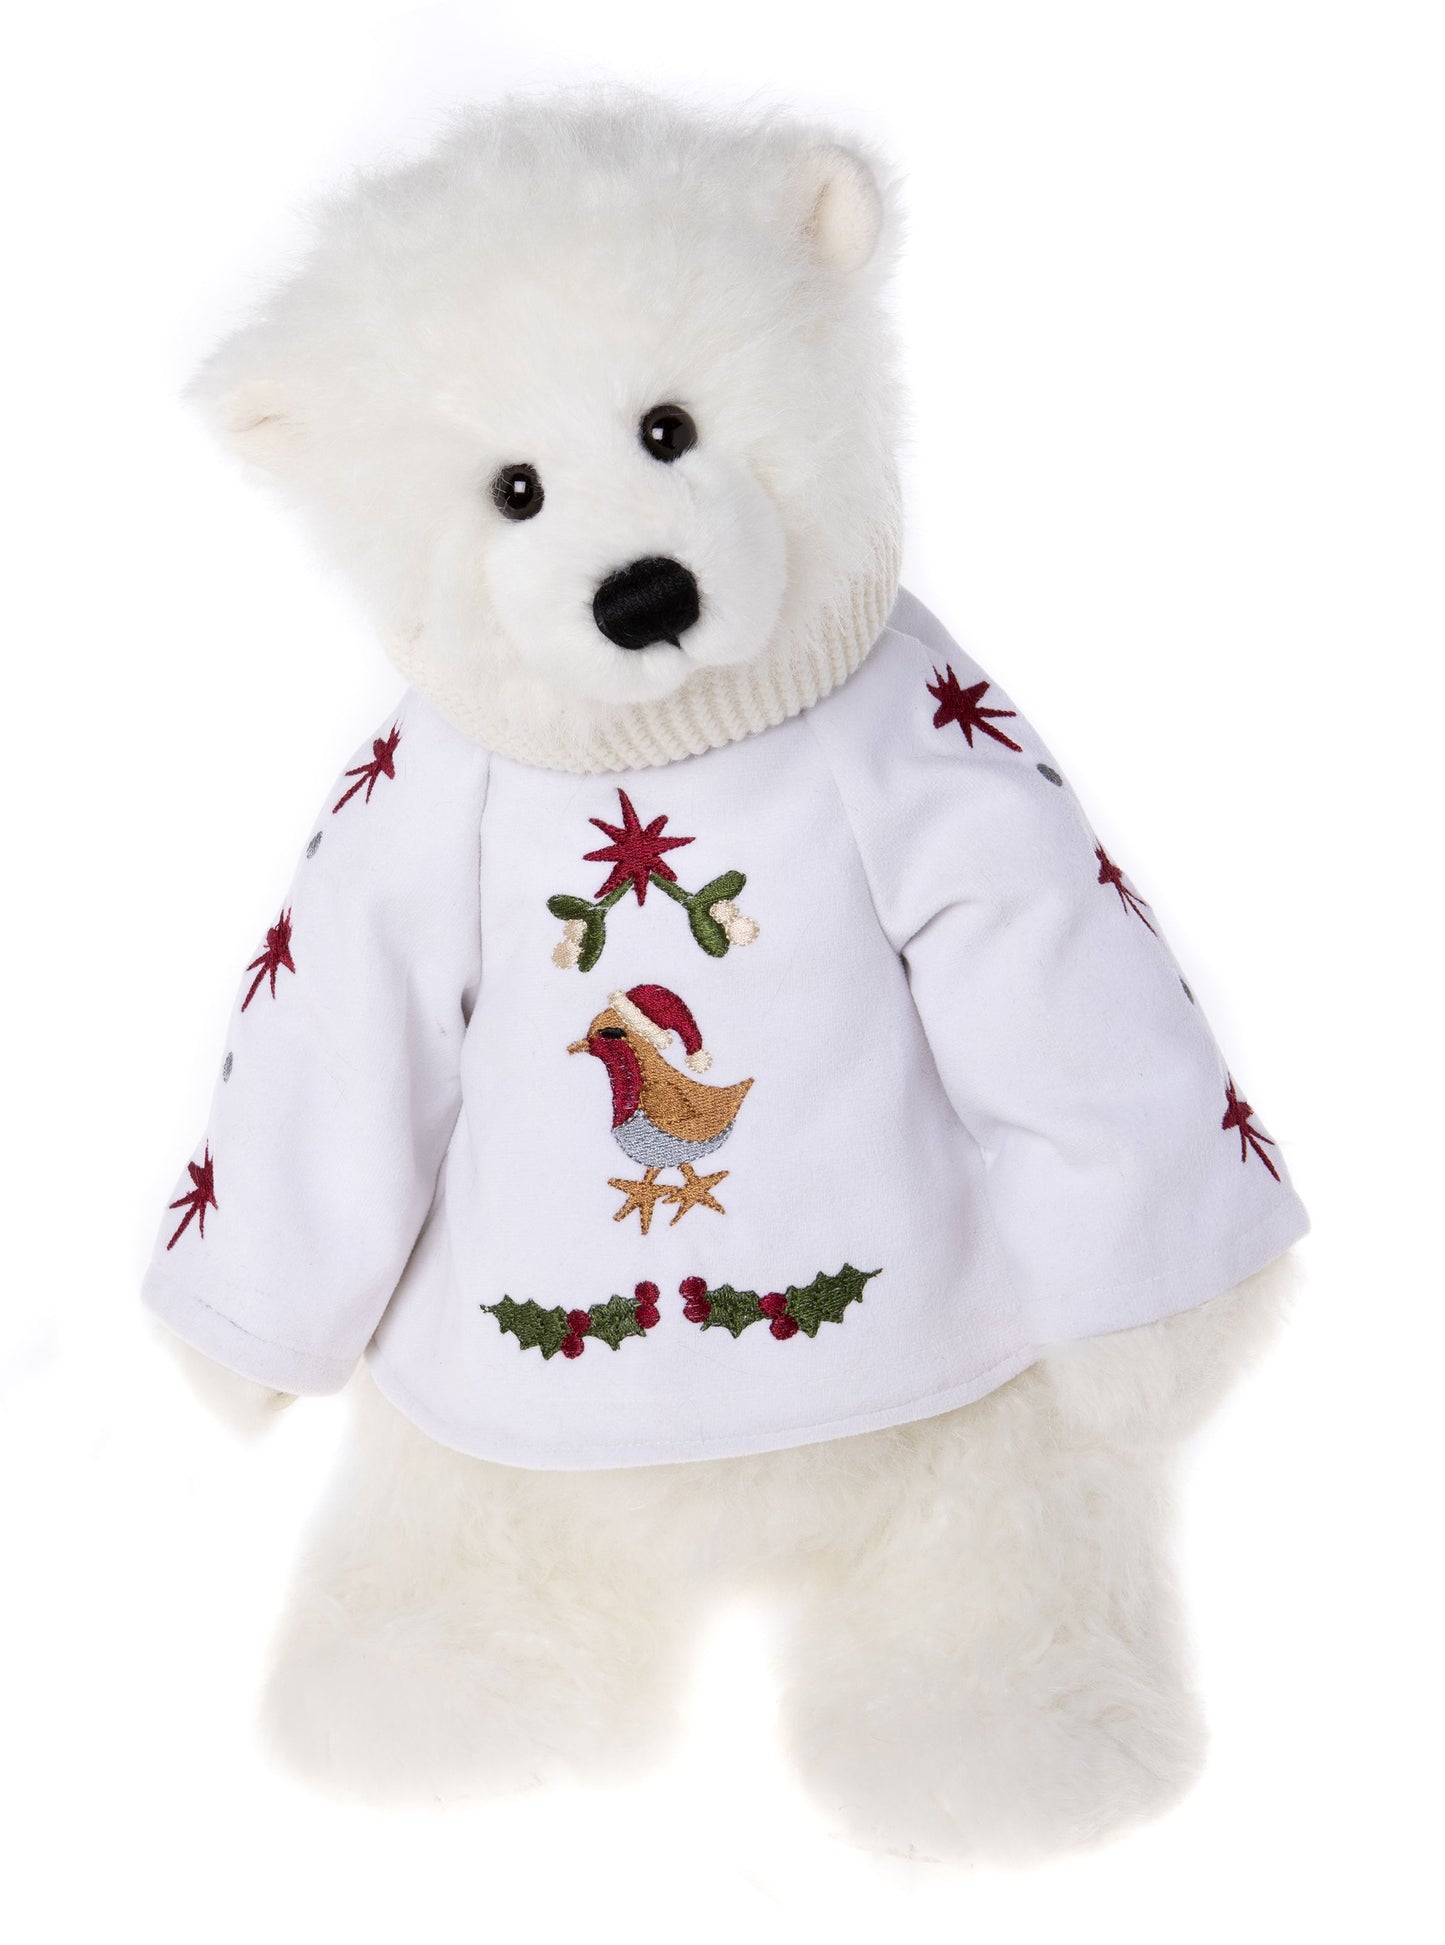 Charlie Bear 2023 Holly Jolly polar bear white fur holiday sweater with embroidered design